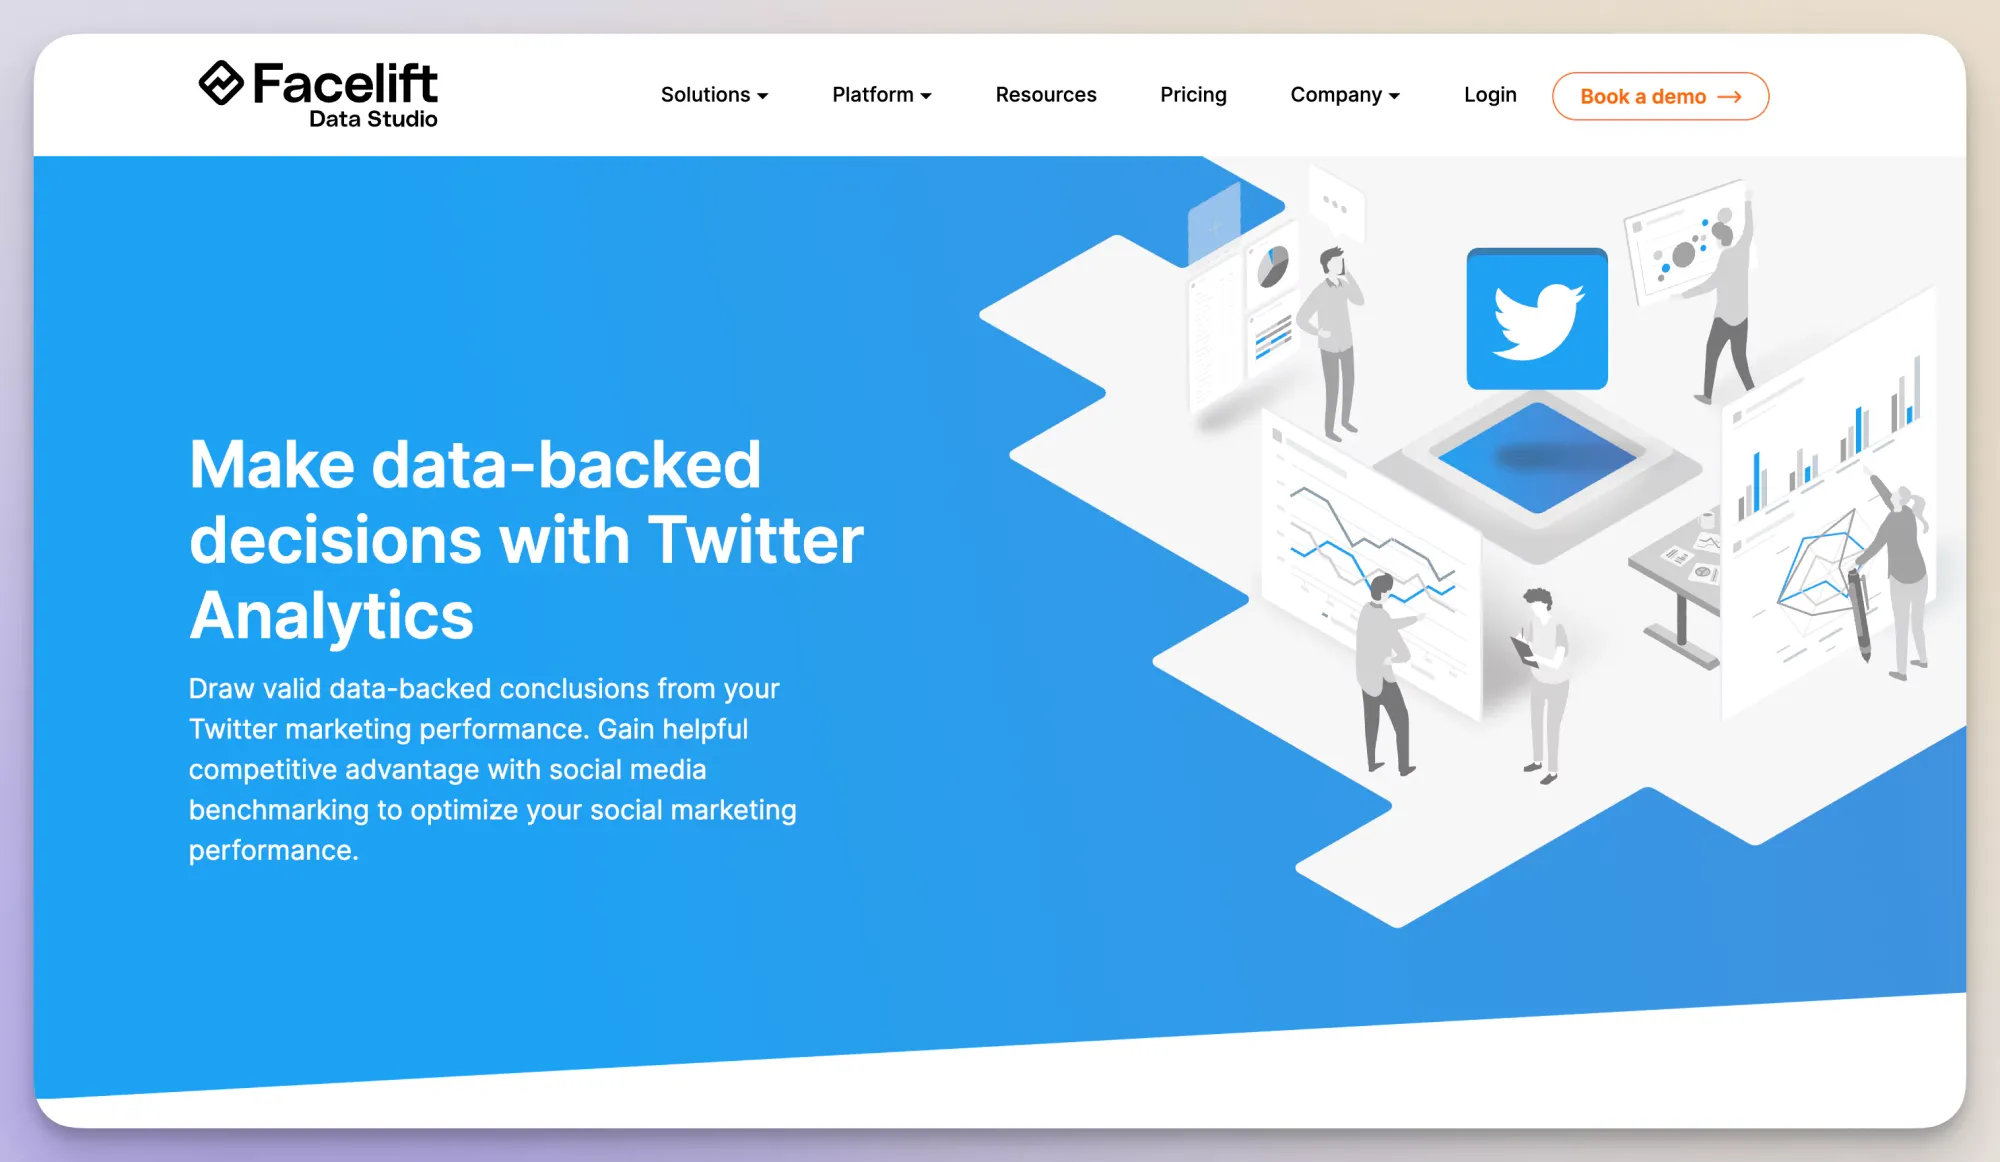 Facelift Quintly Twitter analytics tool